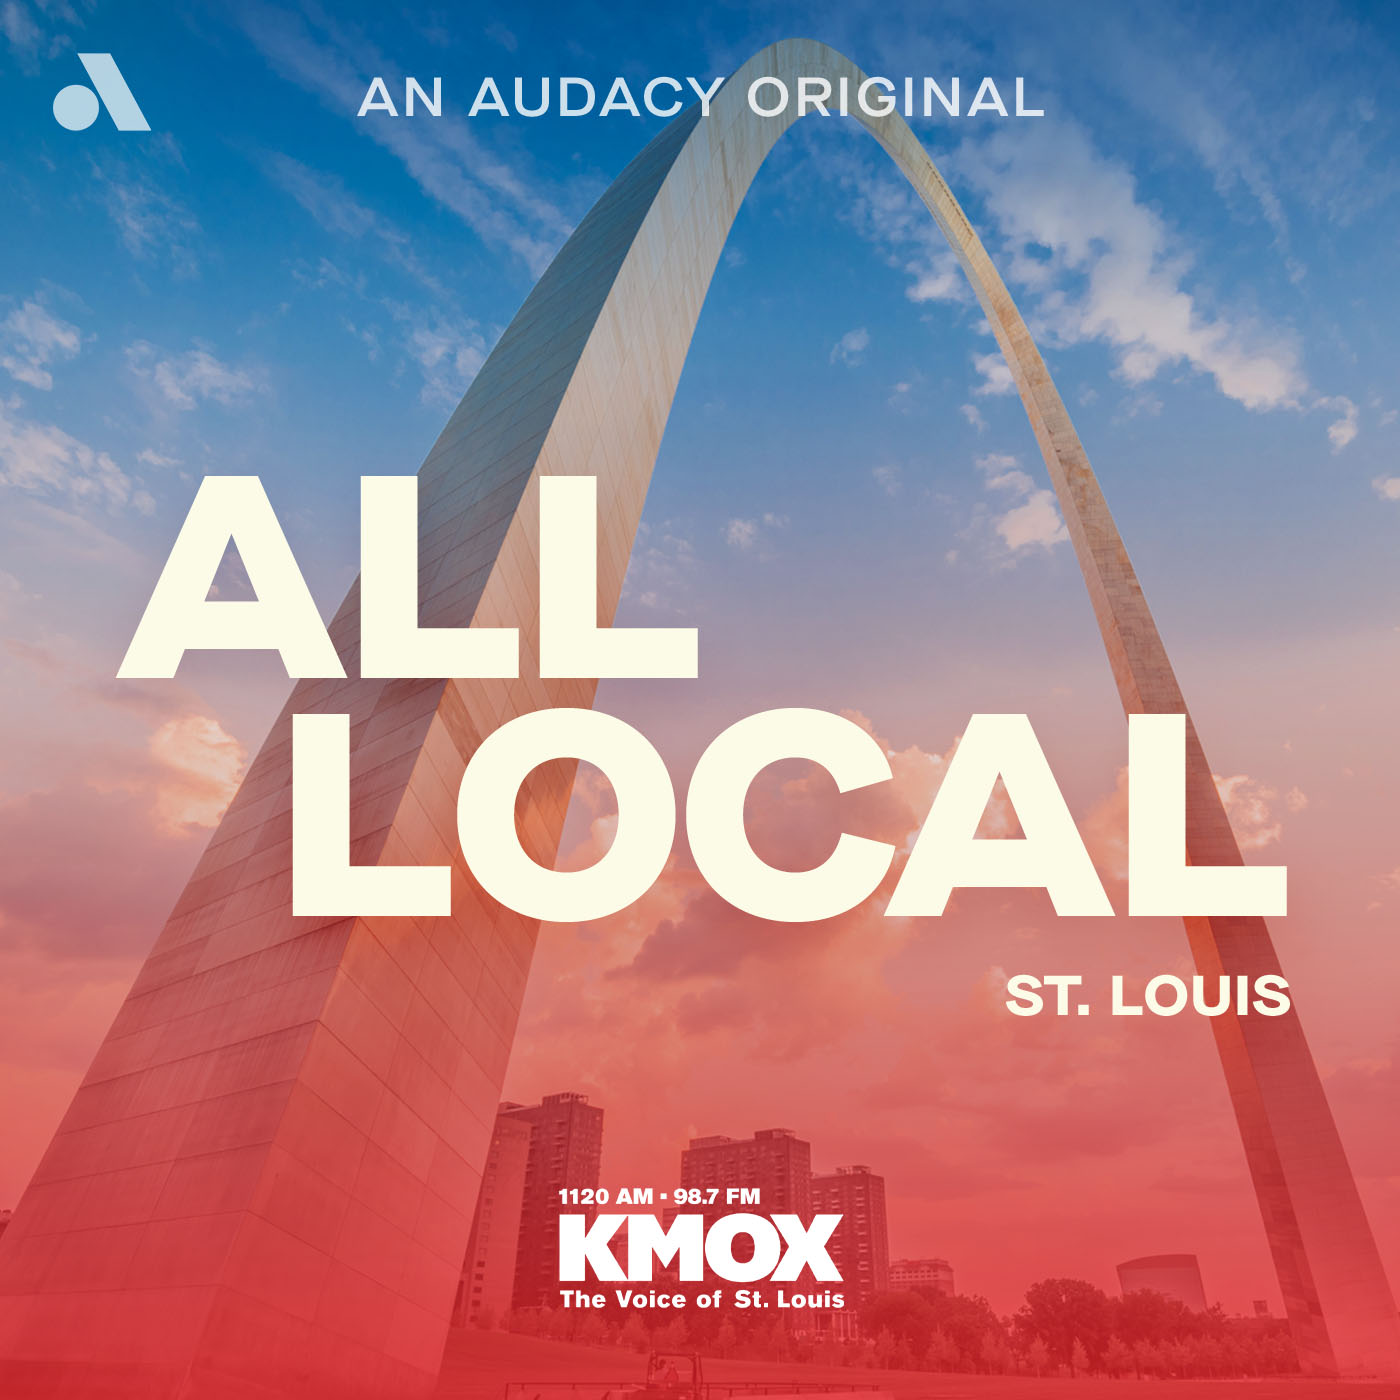 St. Louis All Local PM: School bus crash, petition restrictions, encampment removed, cannabis software problems